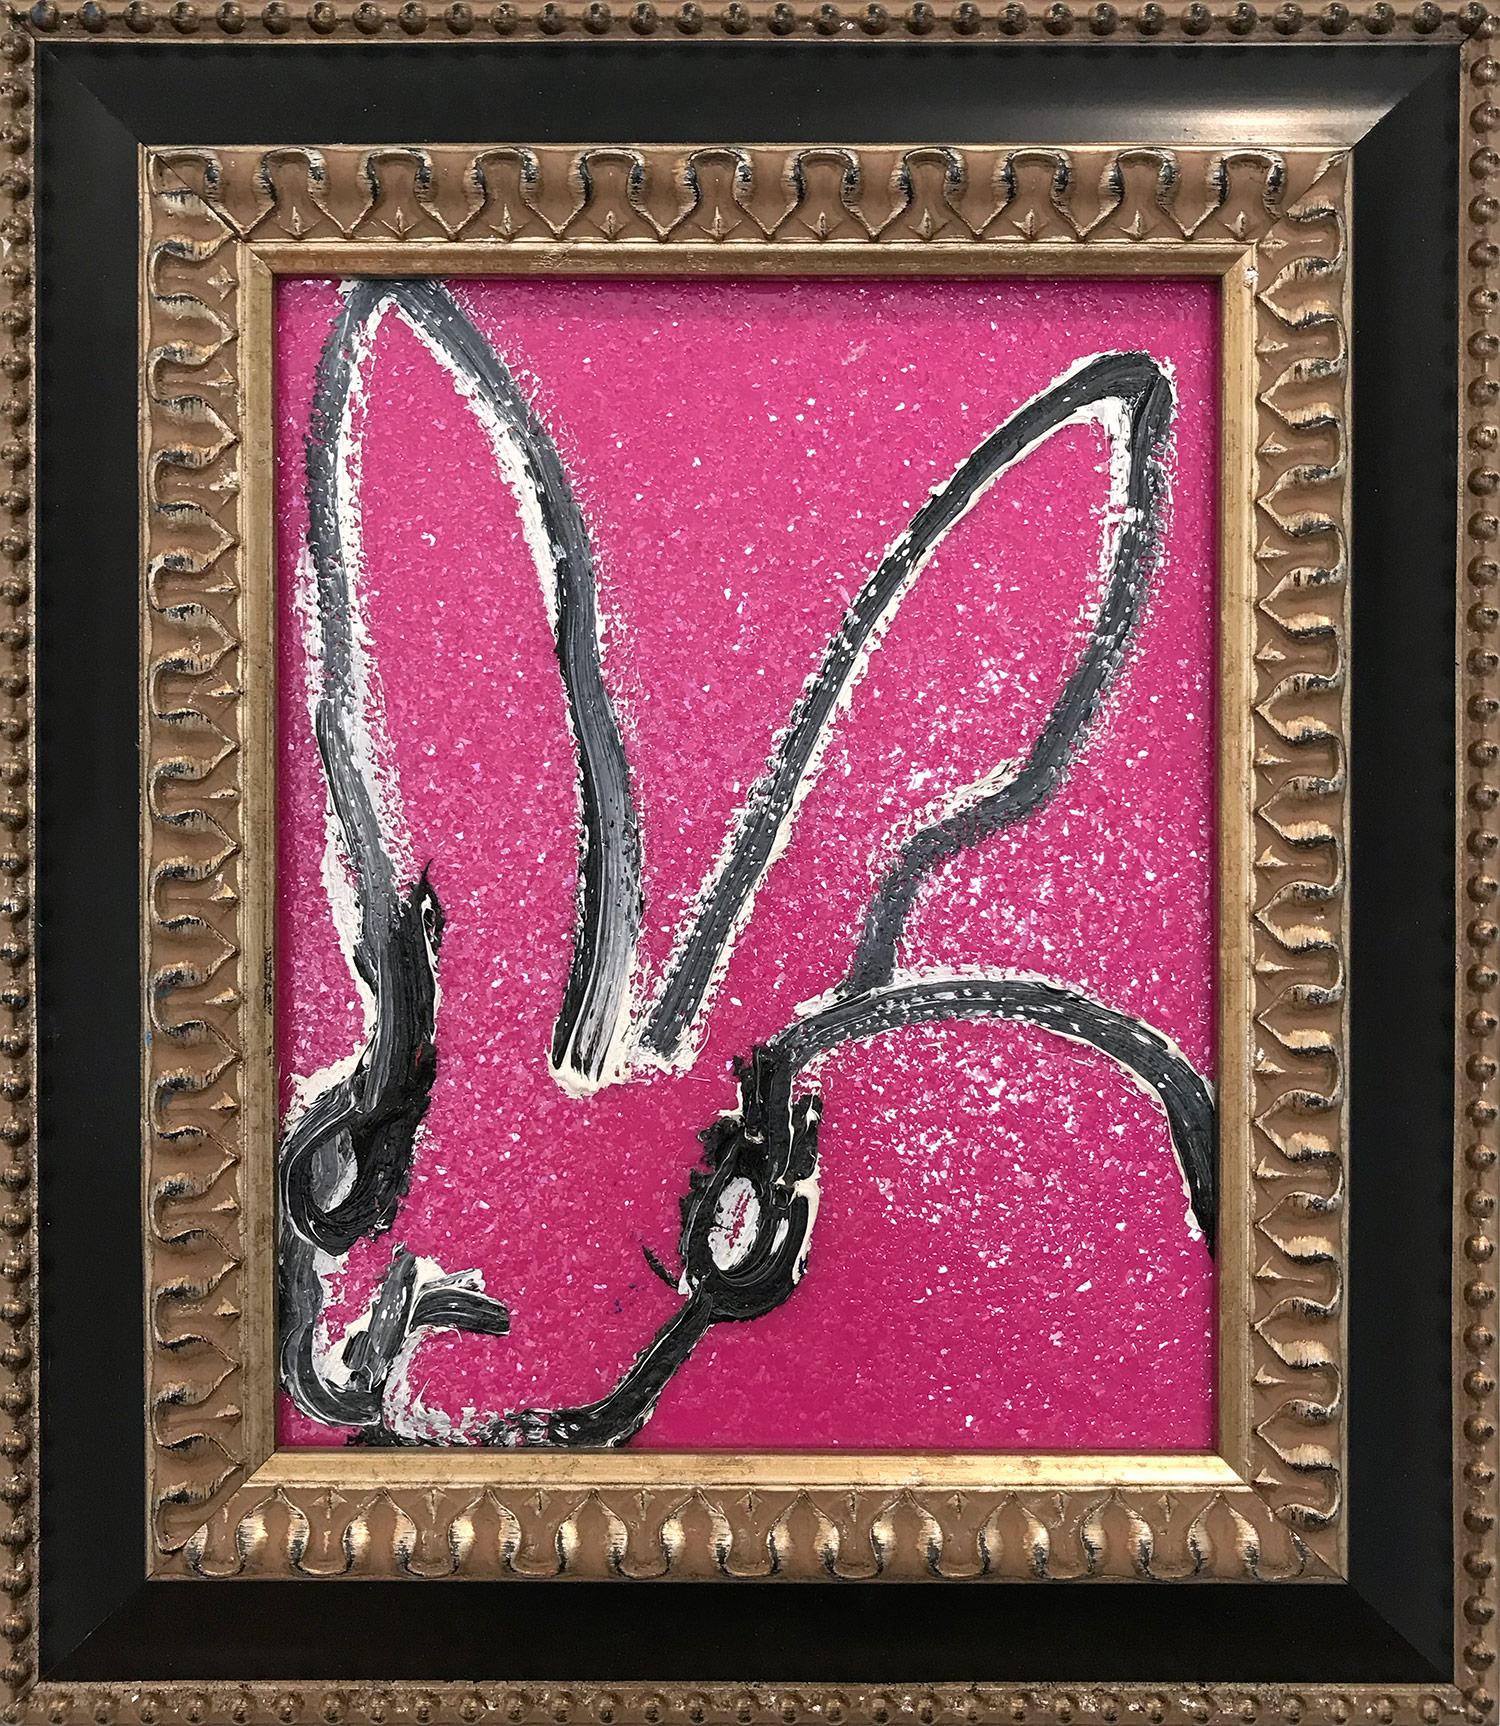 Hunt Slonem Abstract Painting - "Sue" (Resin and Diamond Dust Bunny on Fuchsia) Oil Painting on Wood Panel